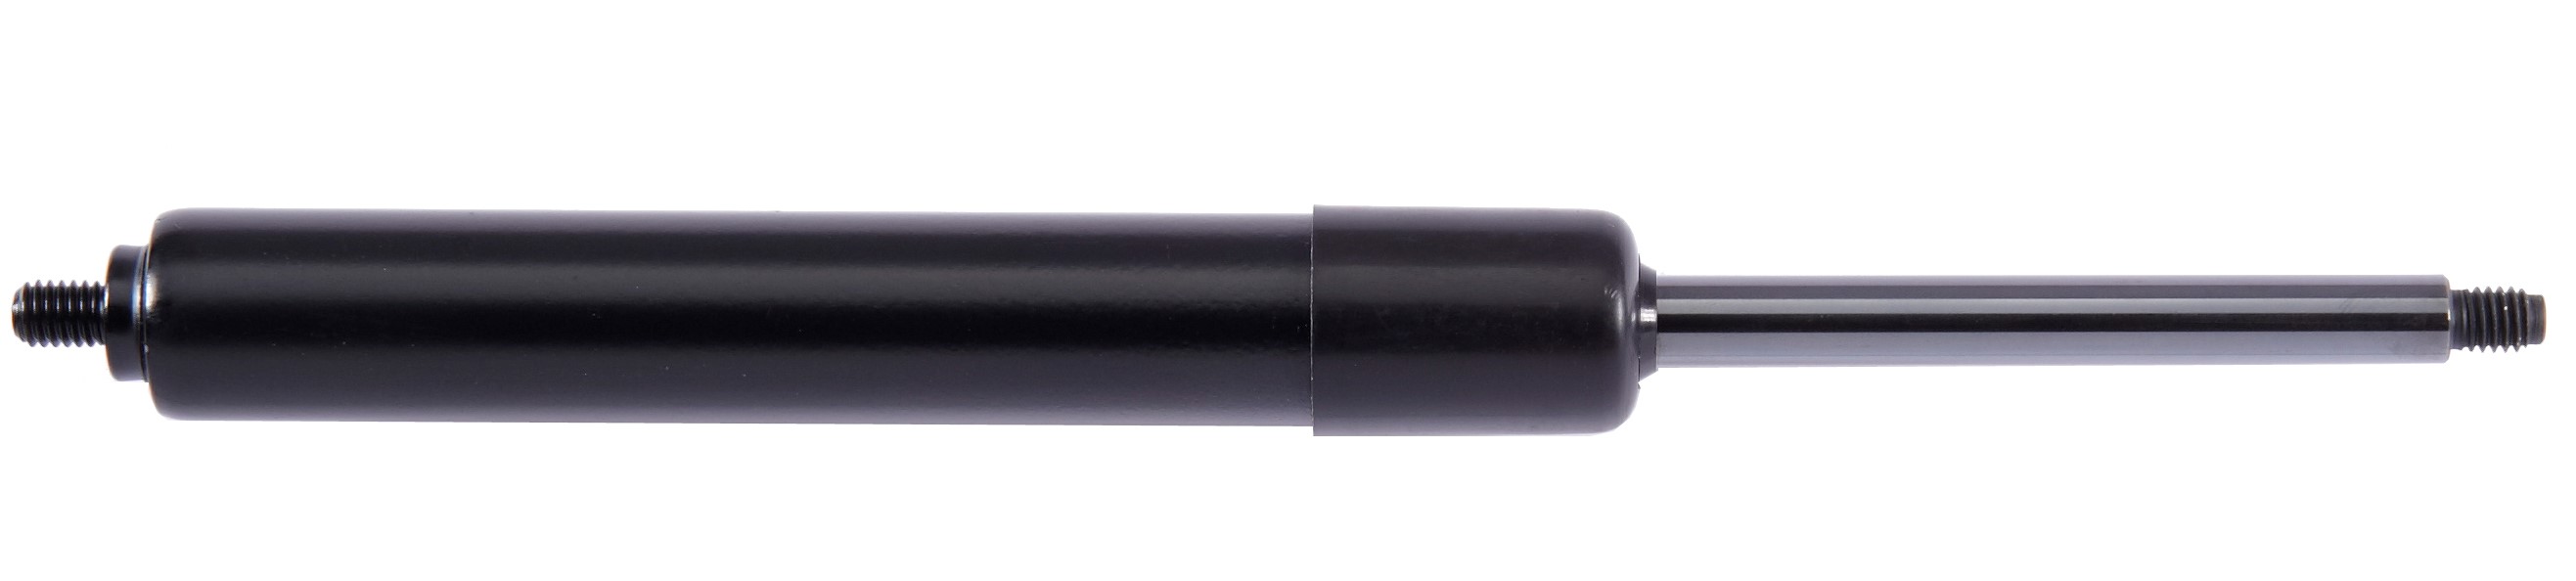 Gas spring with protective cap